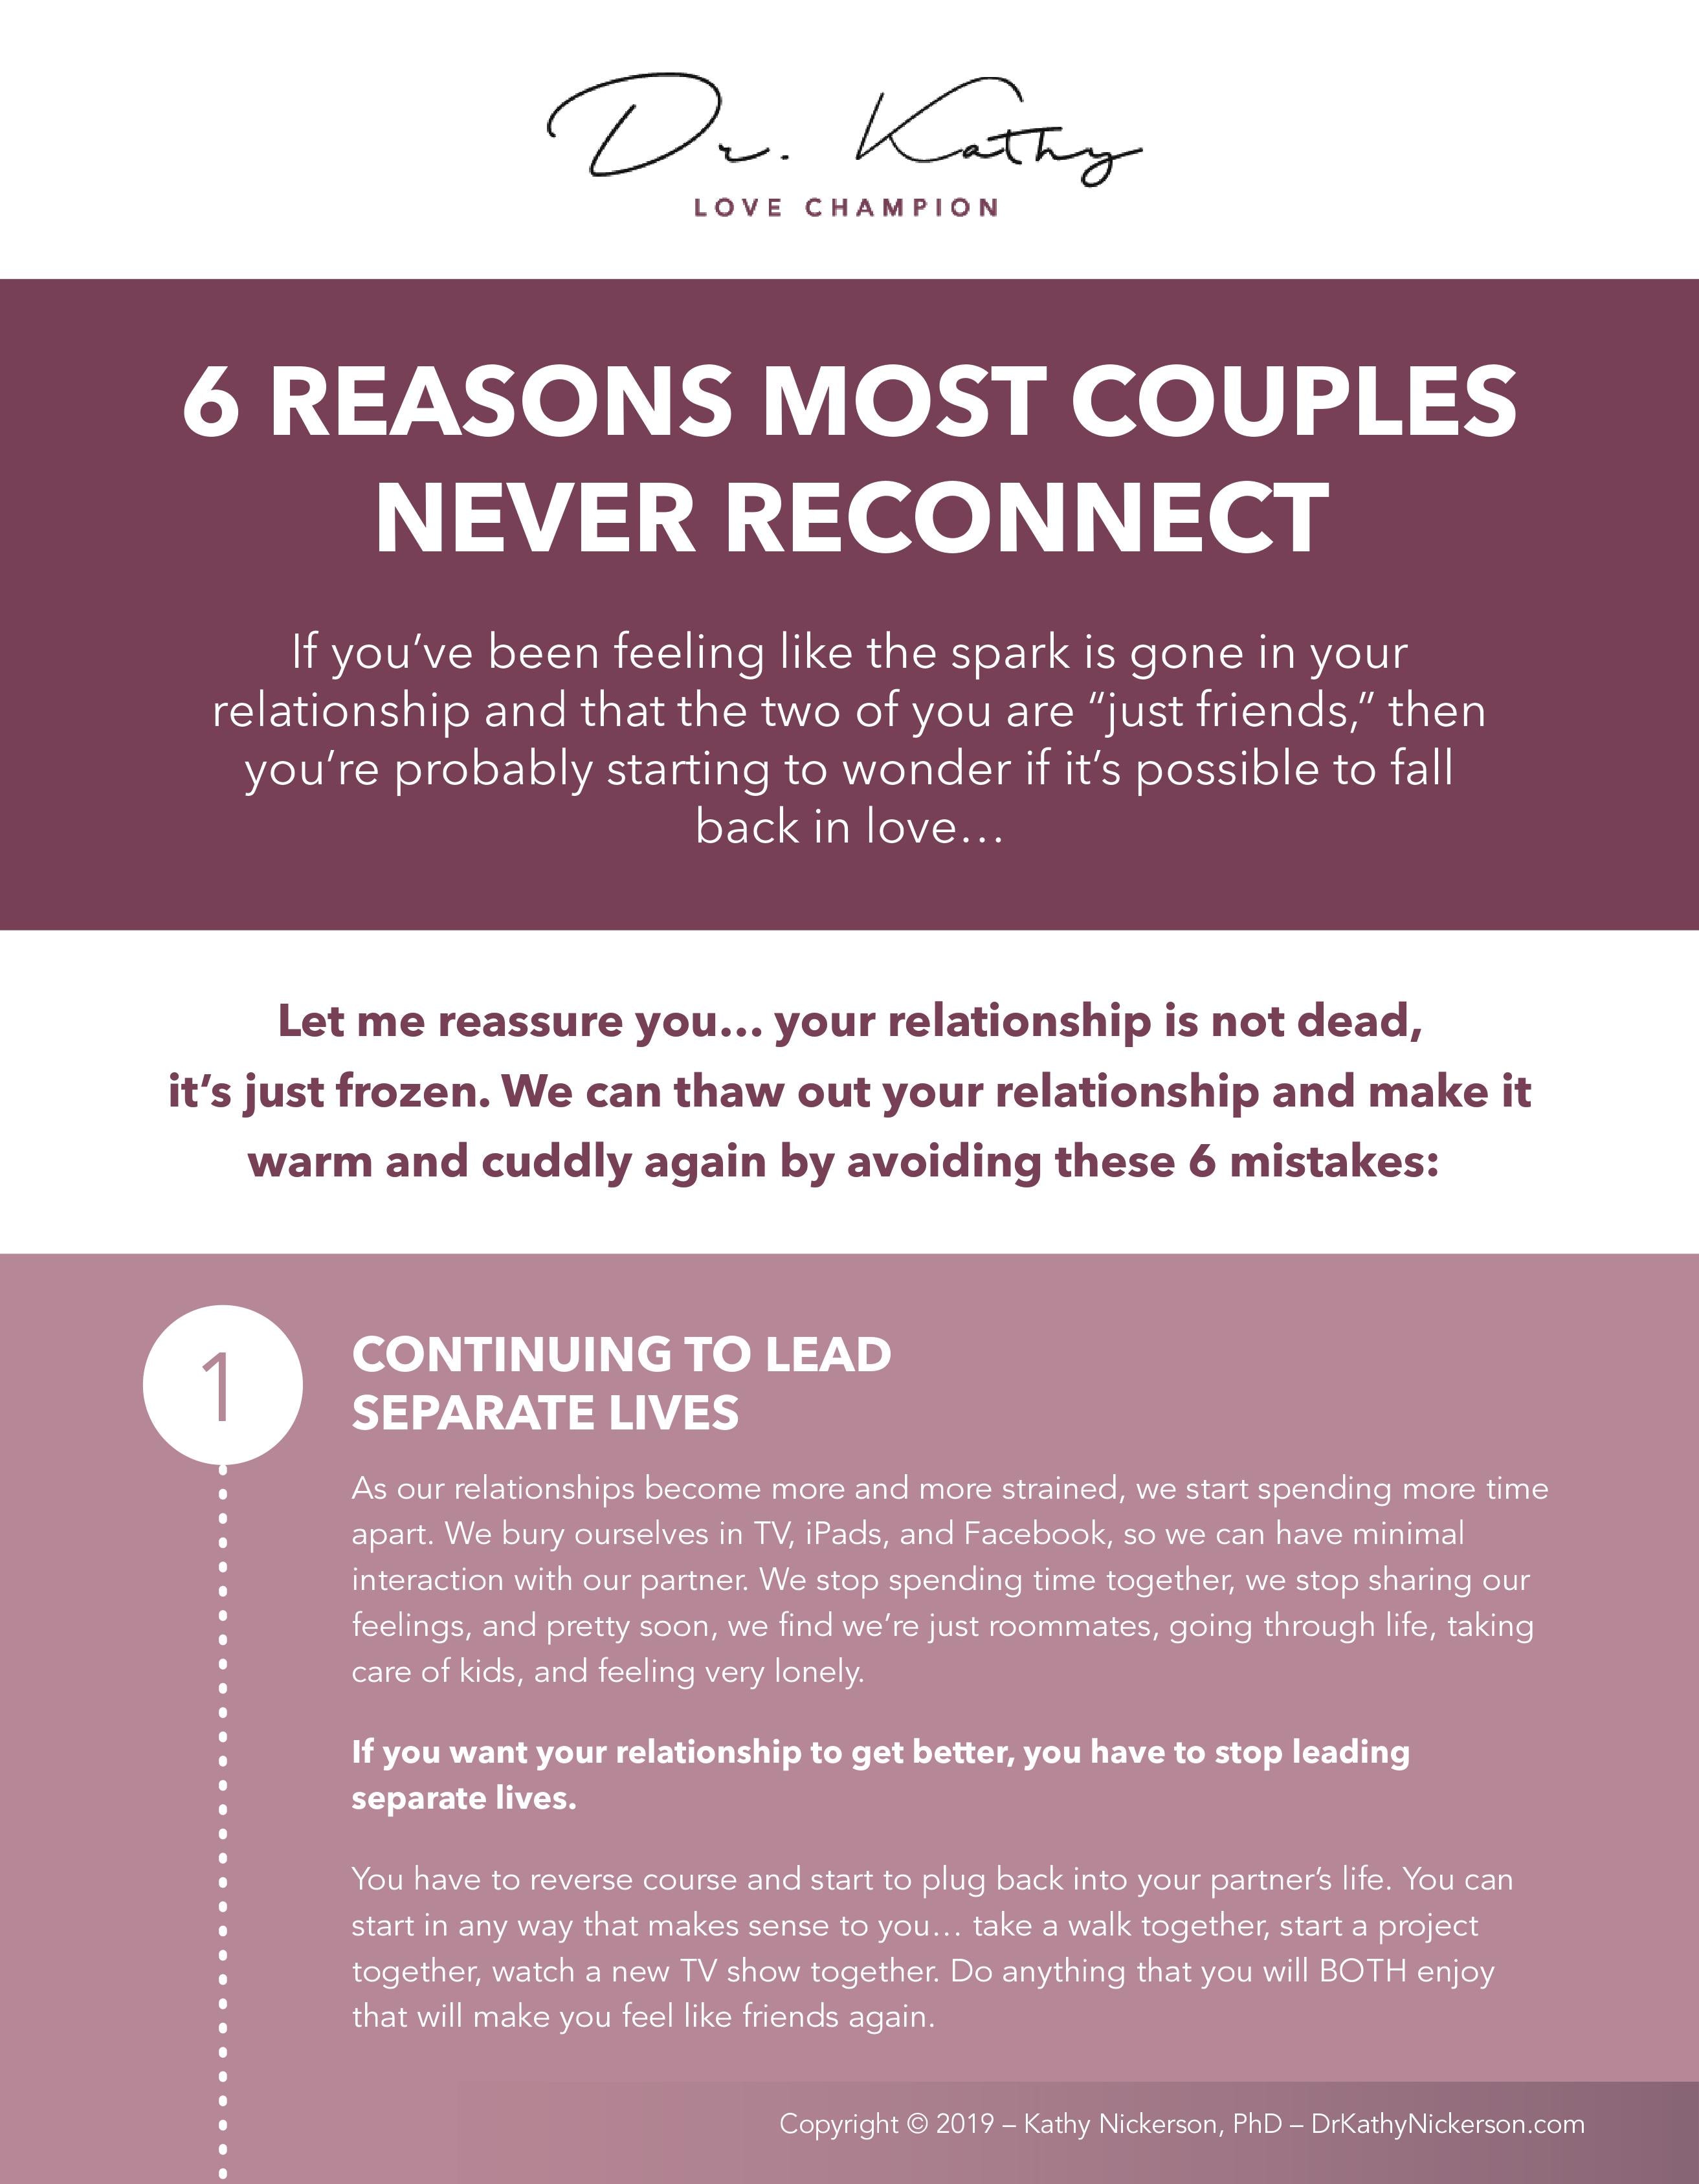 6 Reasons Most Couples Never Reconnect